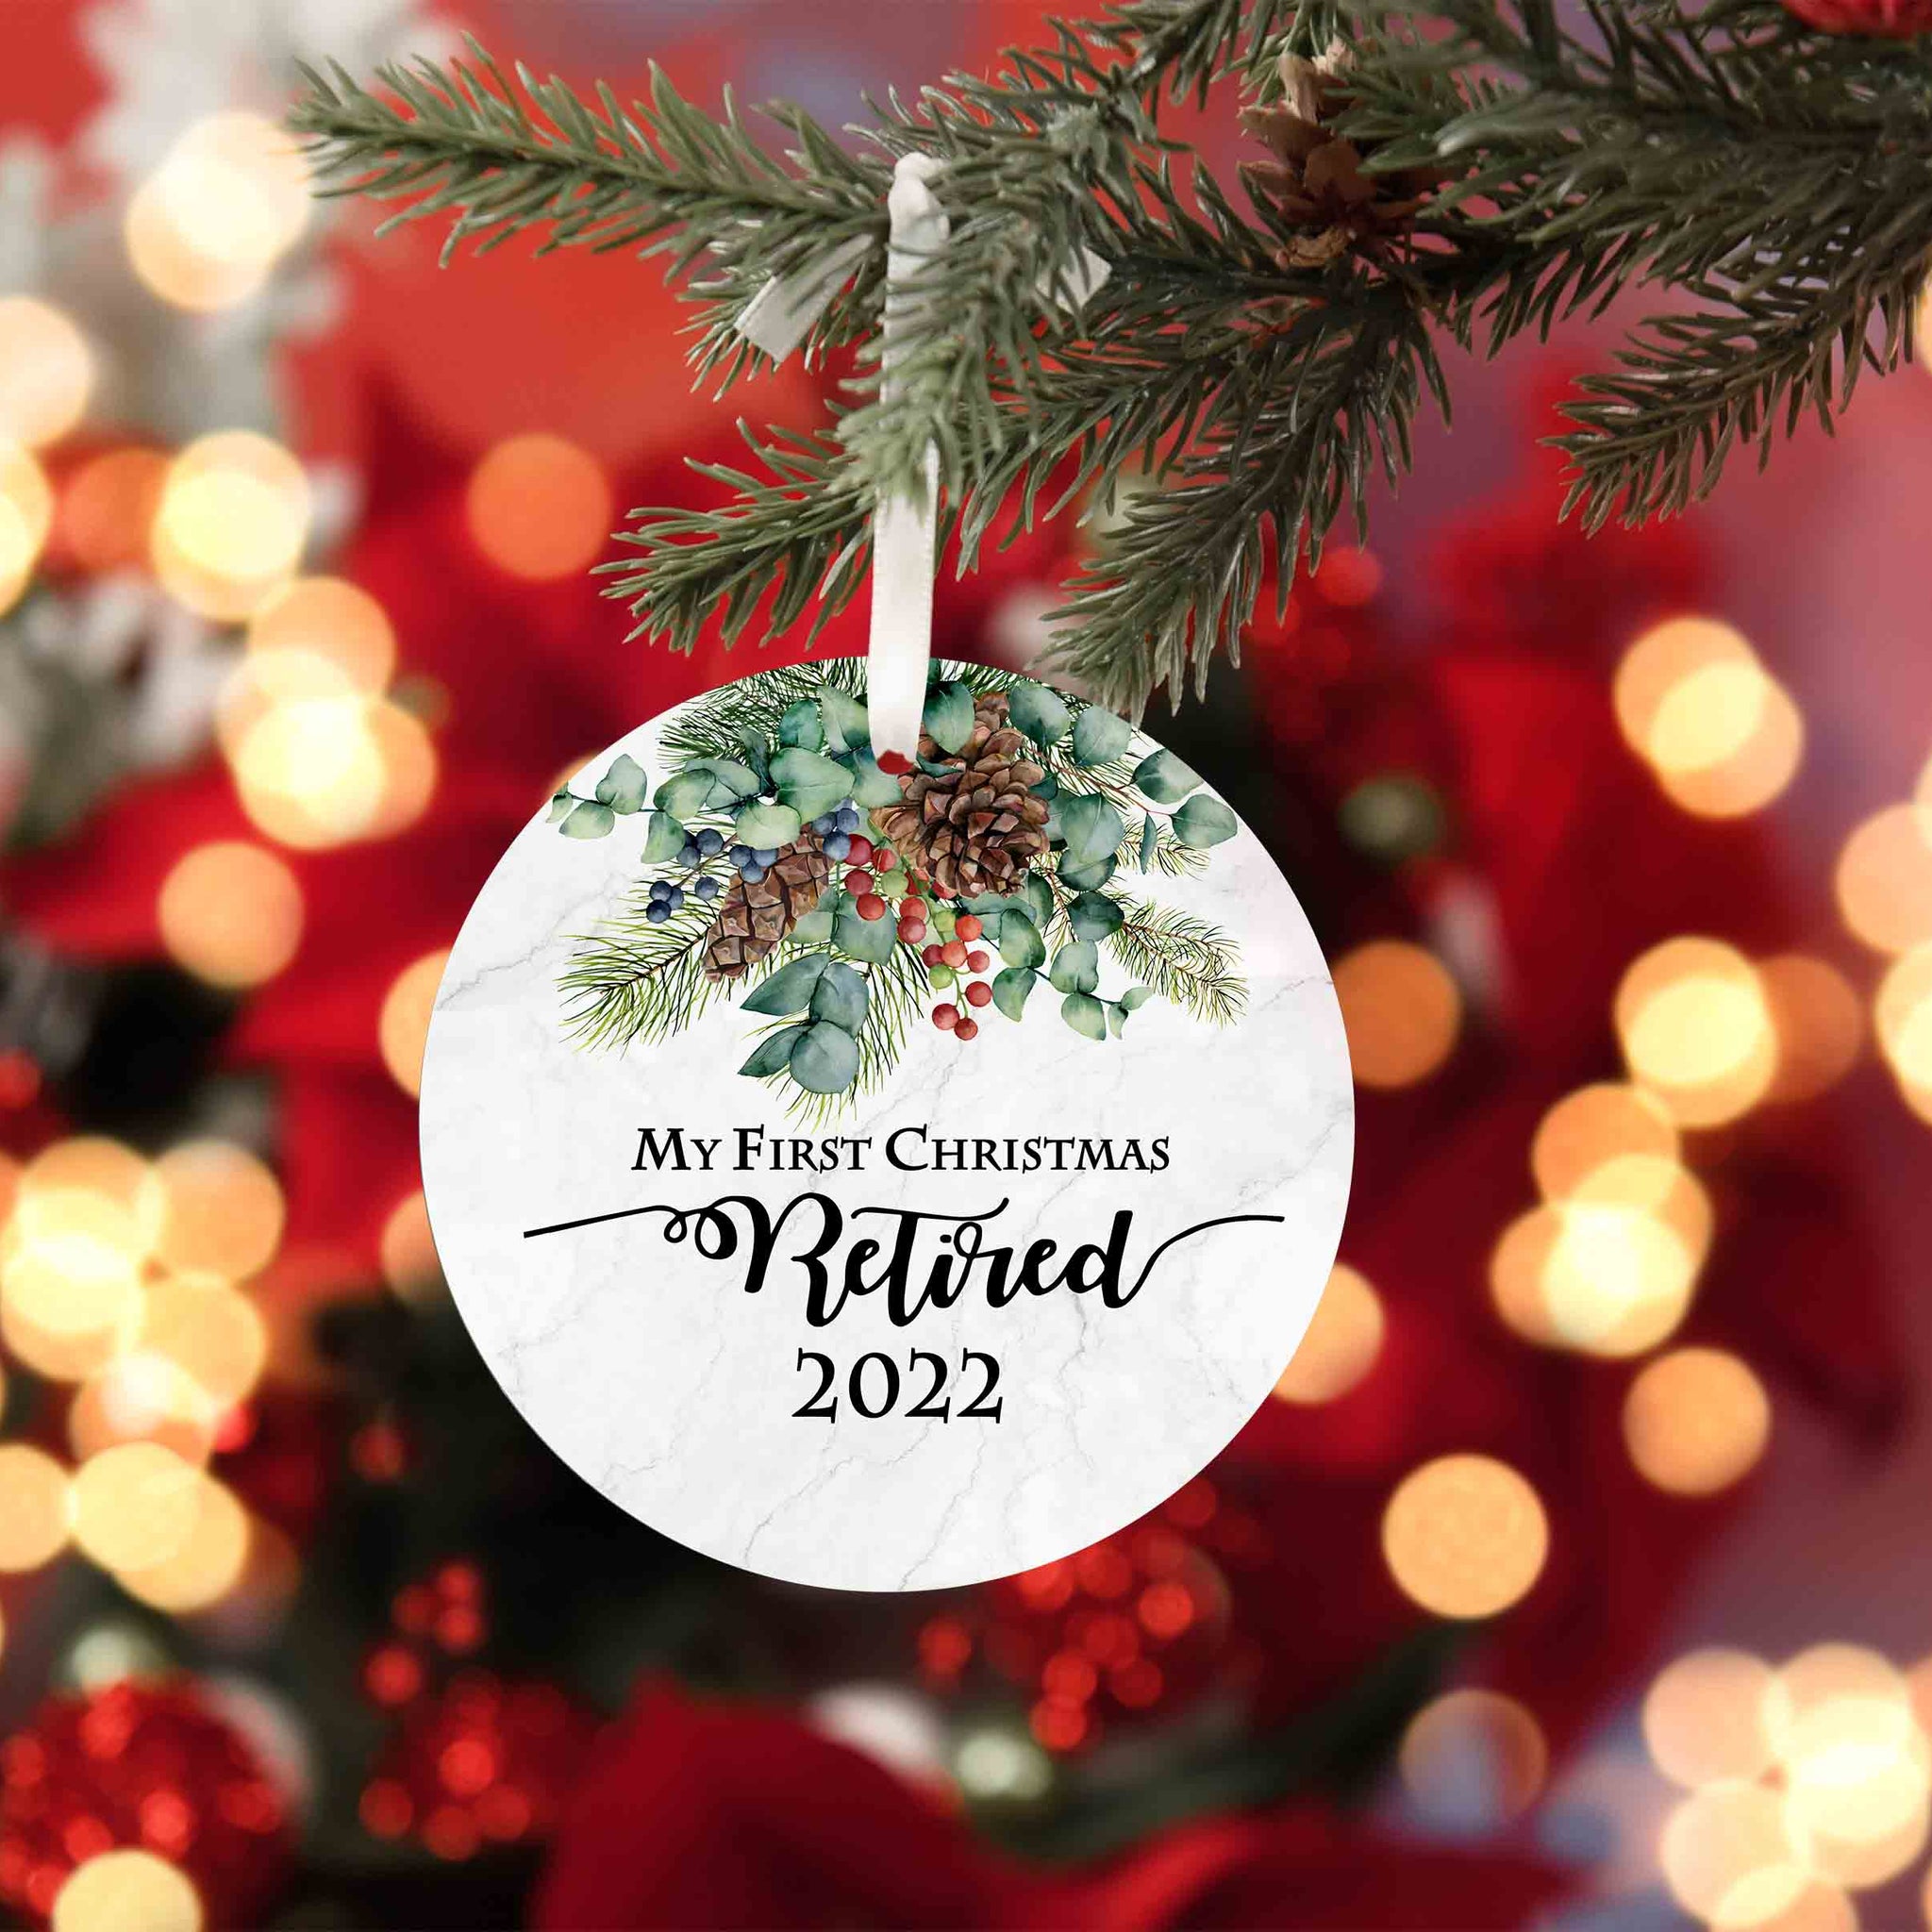 First Christmas Retired Ornament 2022 Ornament, Personalized Christmas Ornaments, Retirement Christmas Ornament, Christmas Ornaments, Ornament Gifts